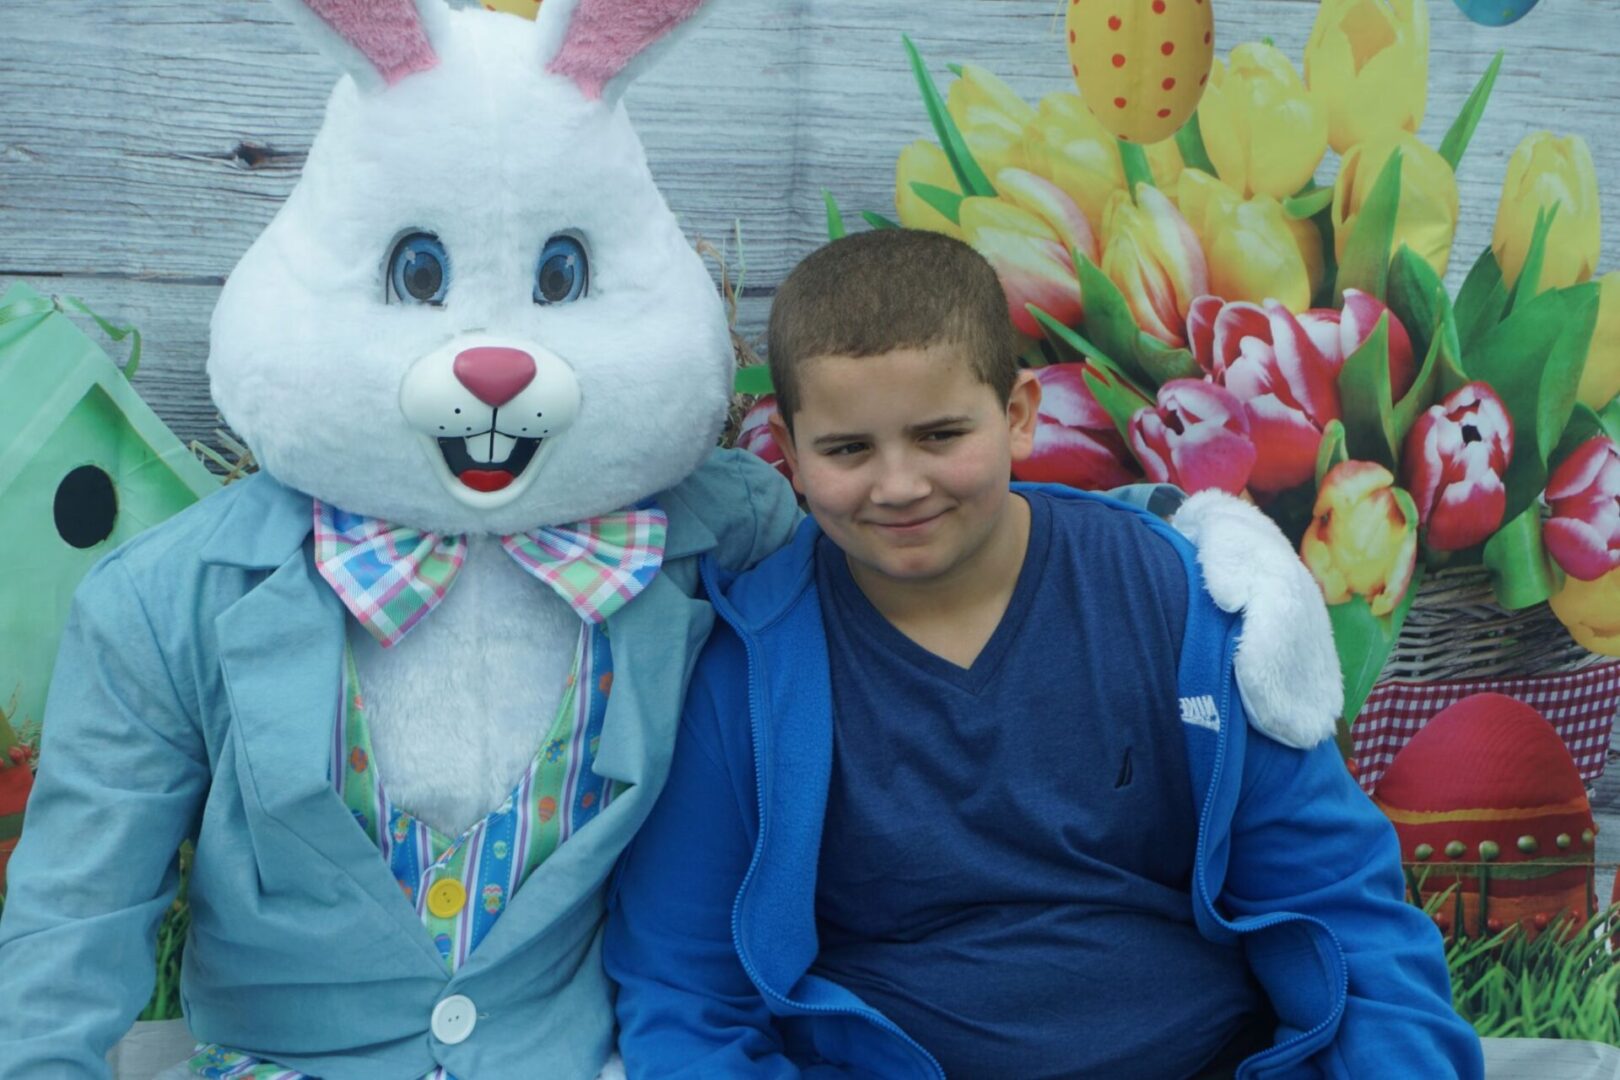 The bunny mascot and a boy in blue shirt and jacket